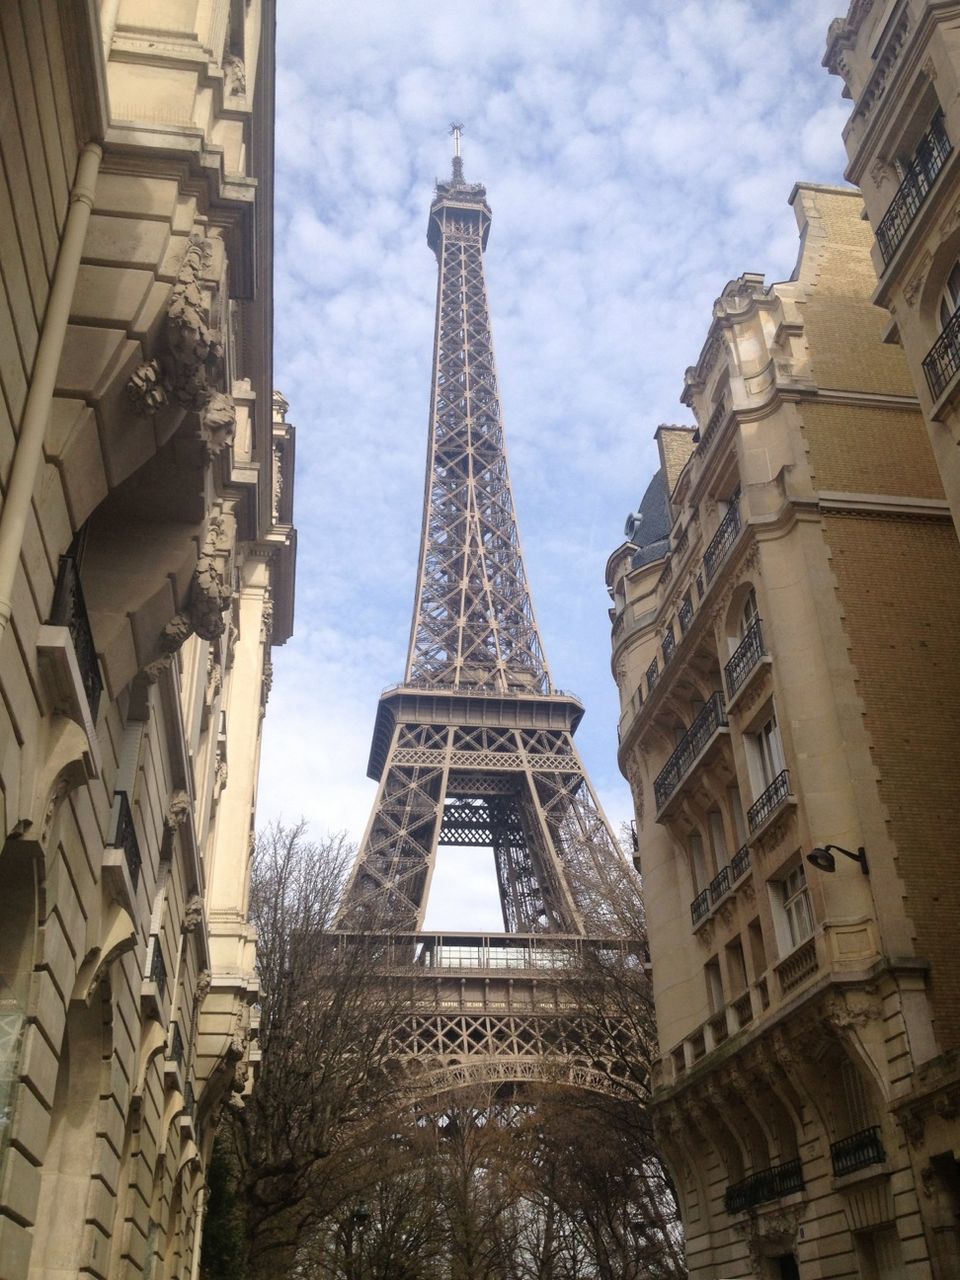 architecture, built structure, tower, building exterior, tall - high, eiffel tower, famous place, international landmark, low angle view, capital cities, travel destinations, tourism, city, culture, travel, sky, history, architectural feature, tall, skyscraper